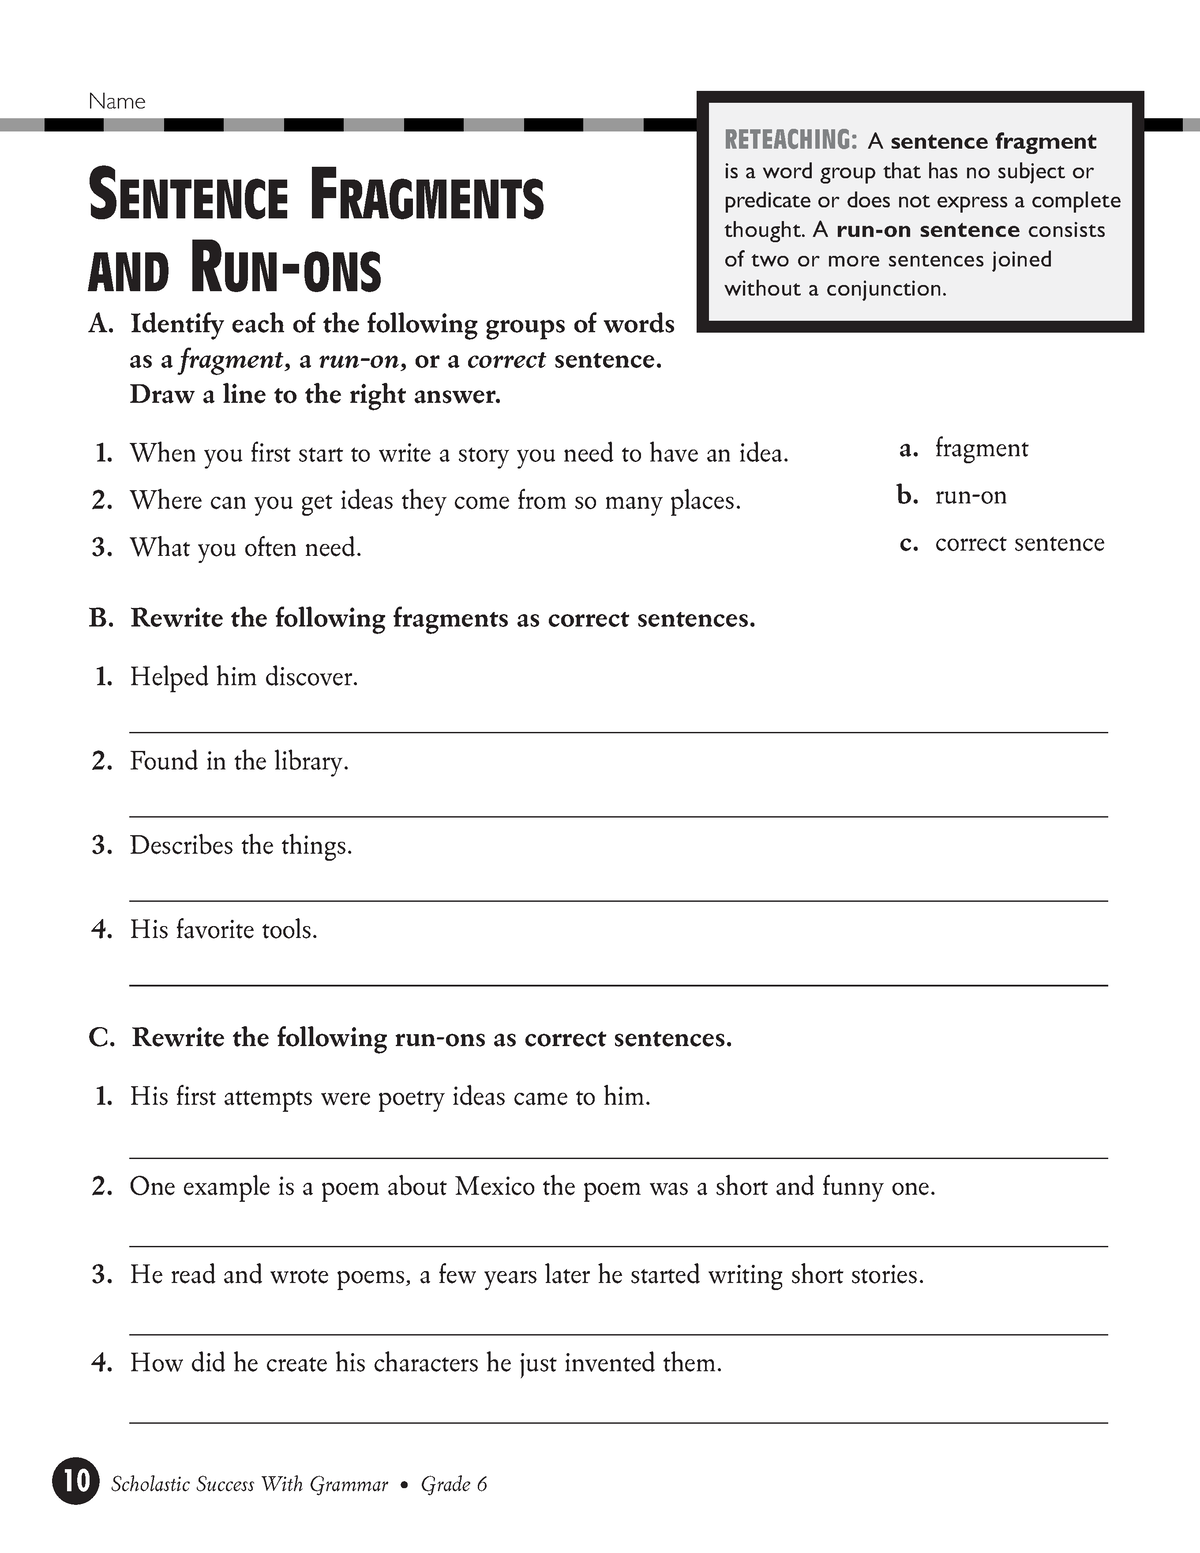 sentences-run-ons-fragments-practice-3-name-sentence-fragments-and